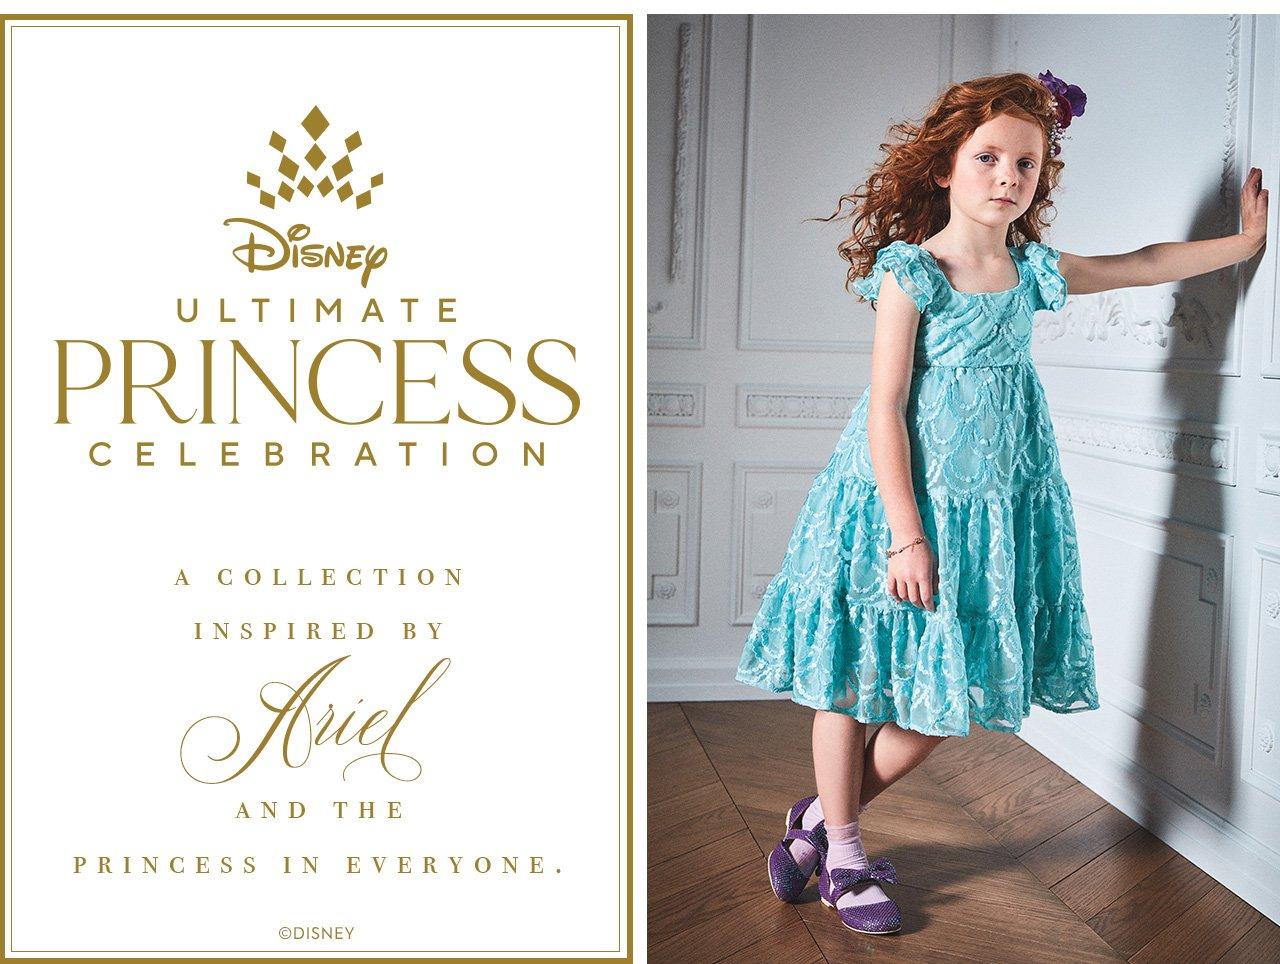 Disney Ultimate Princess Celebrations. A collection inspired by Cinderella and the princess in everyone.